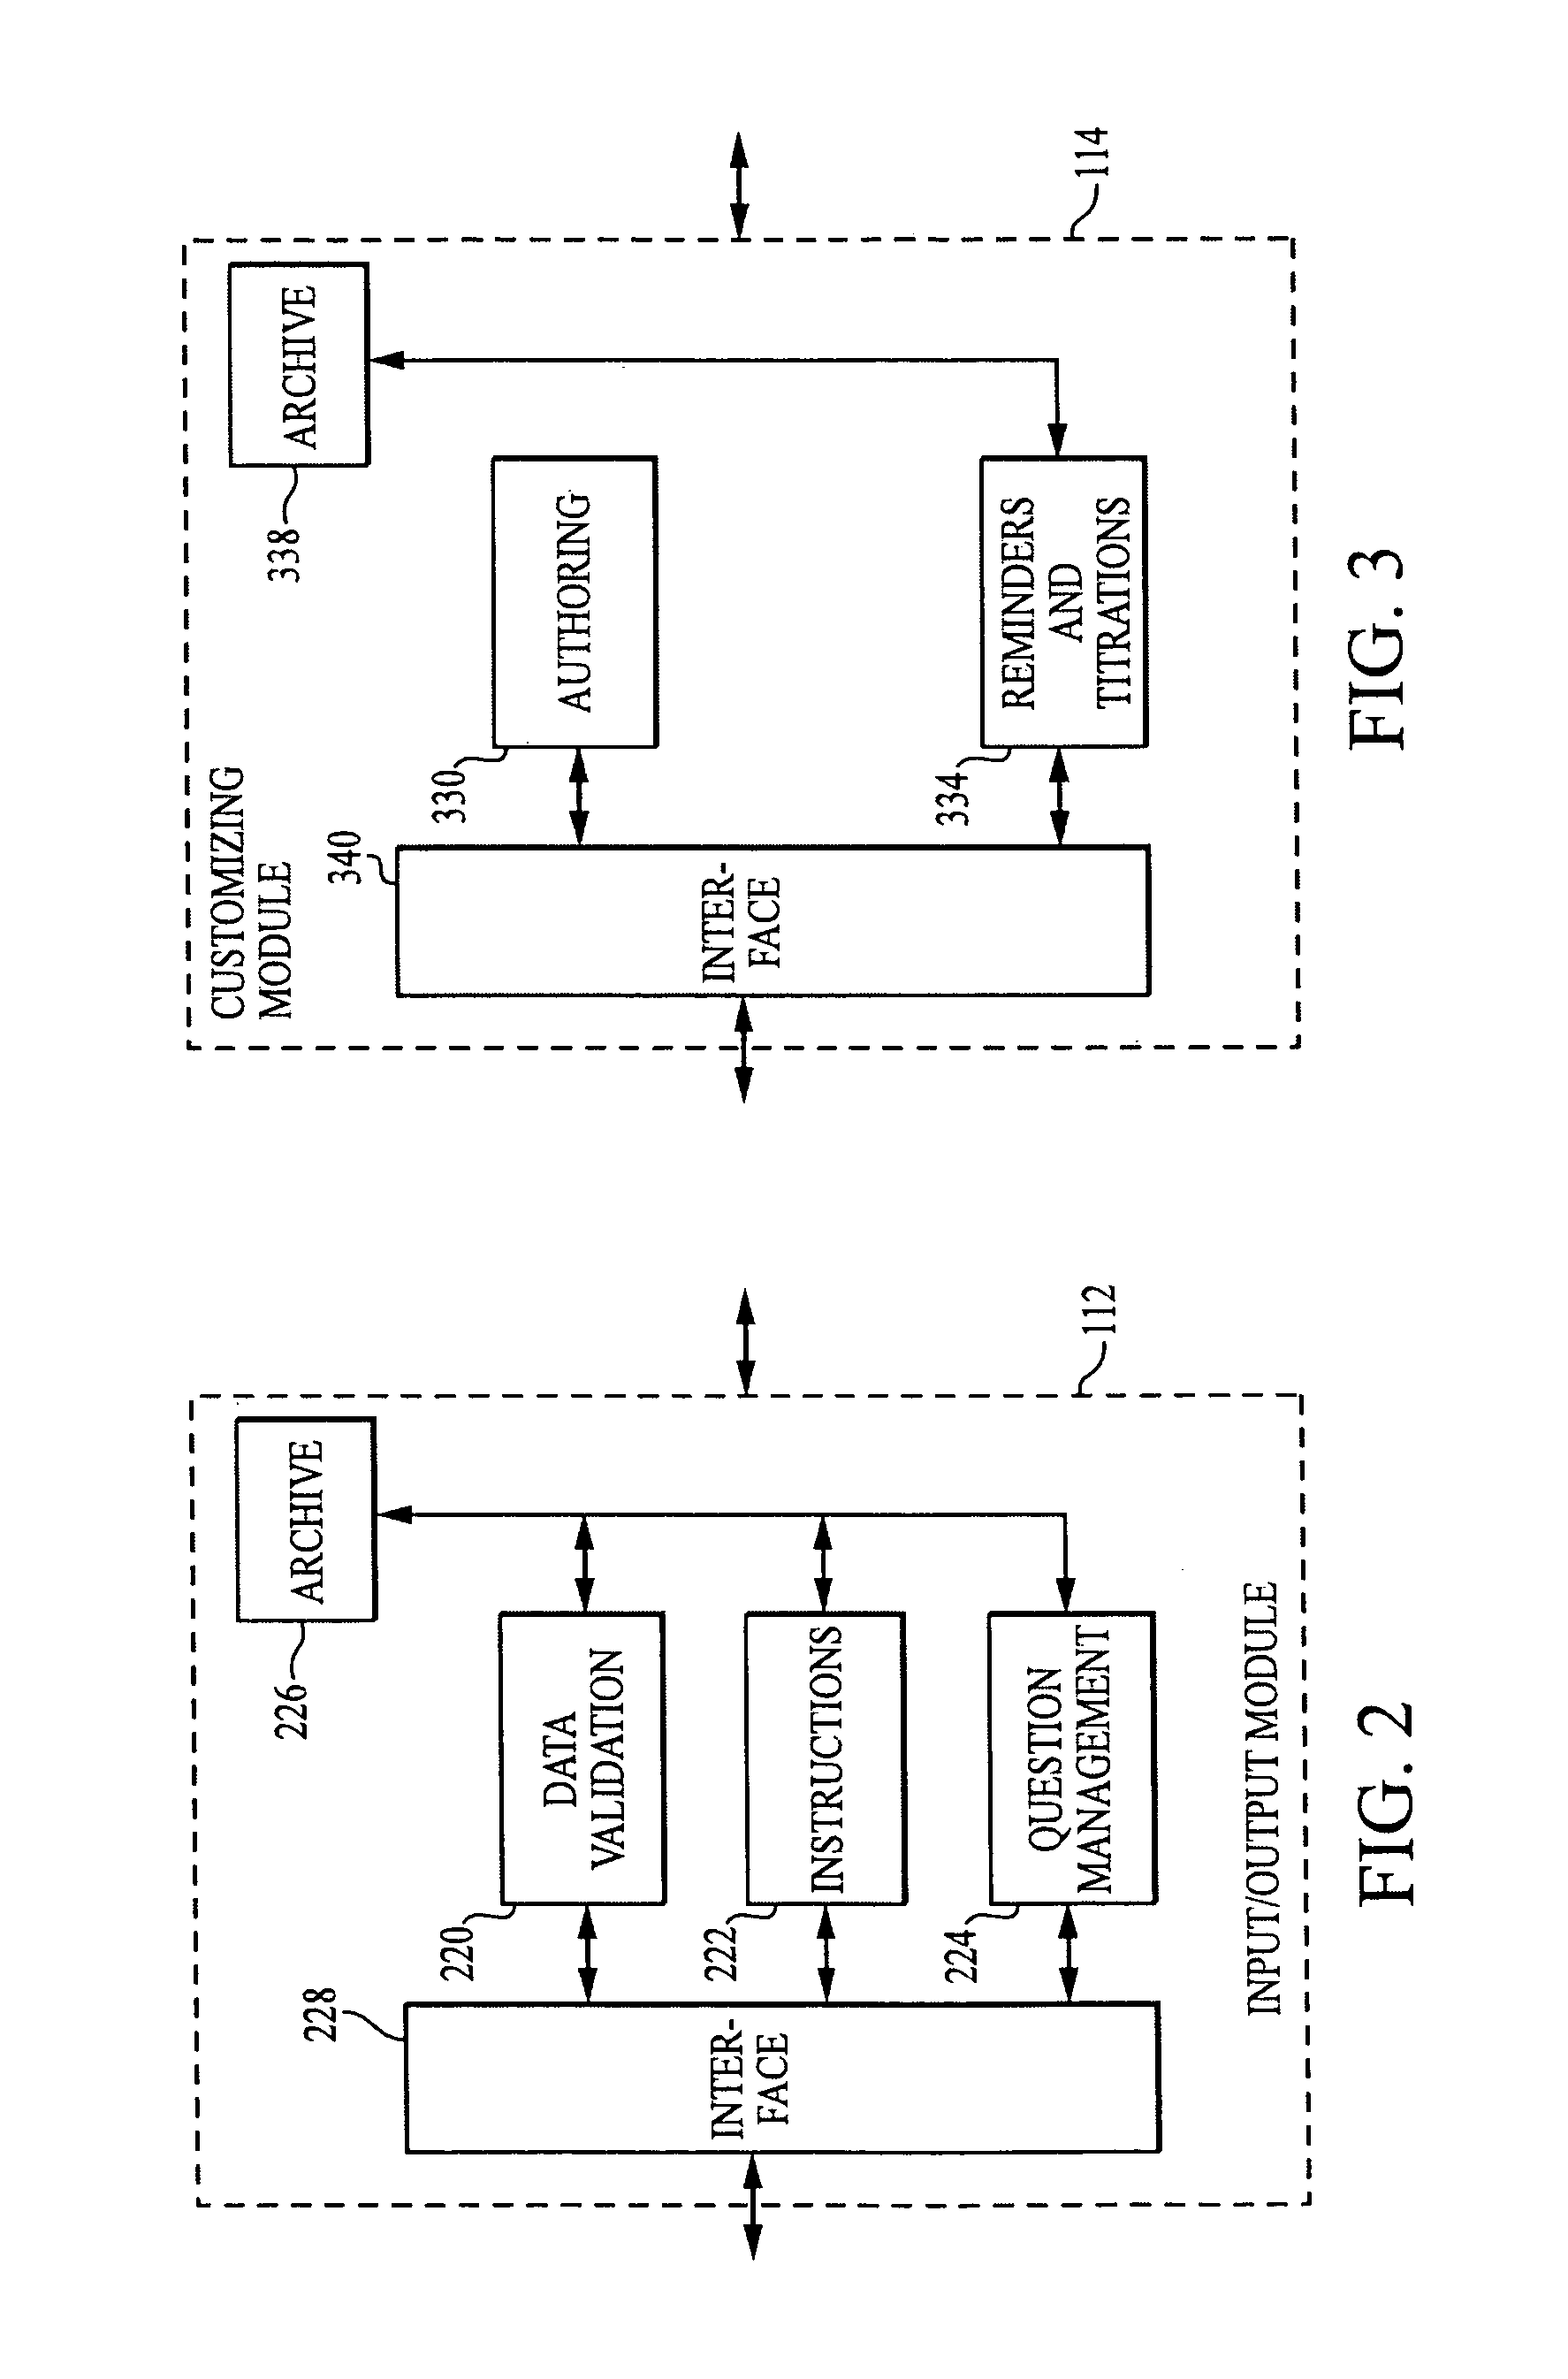 Method and system for outpatient monitoring